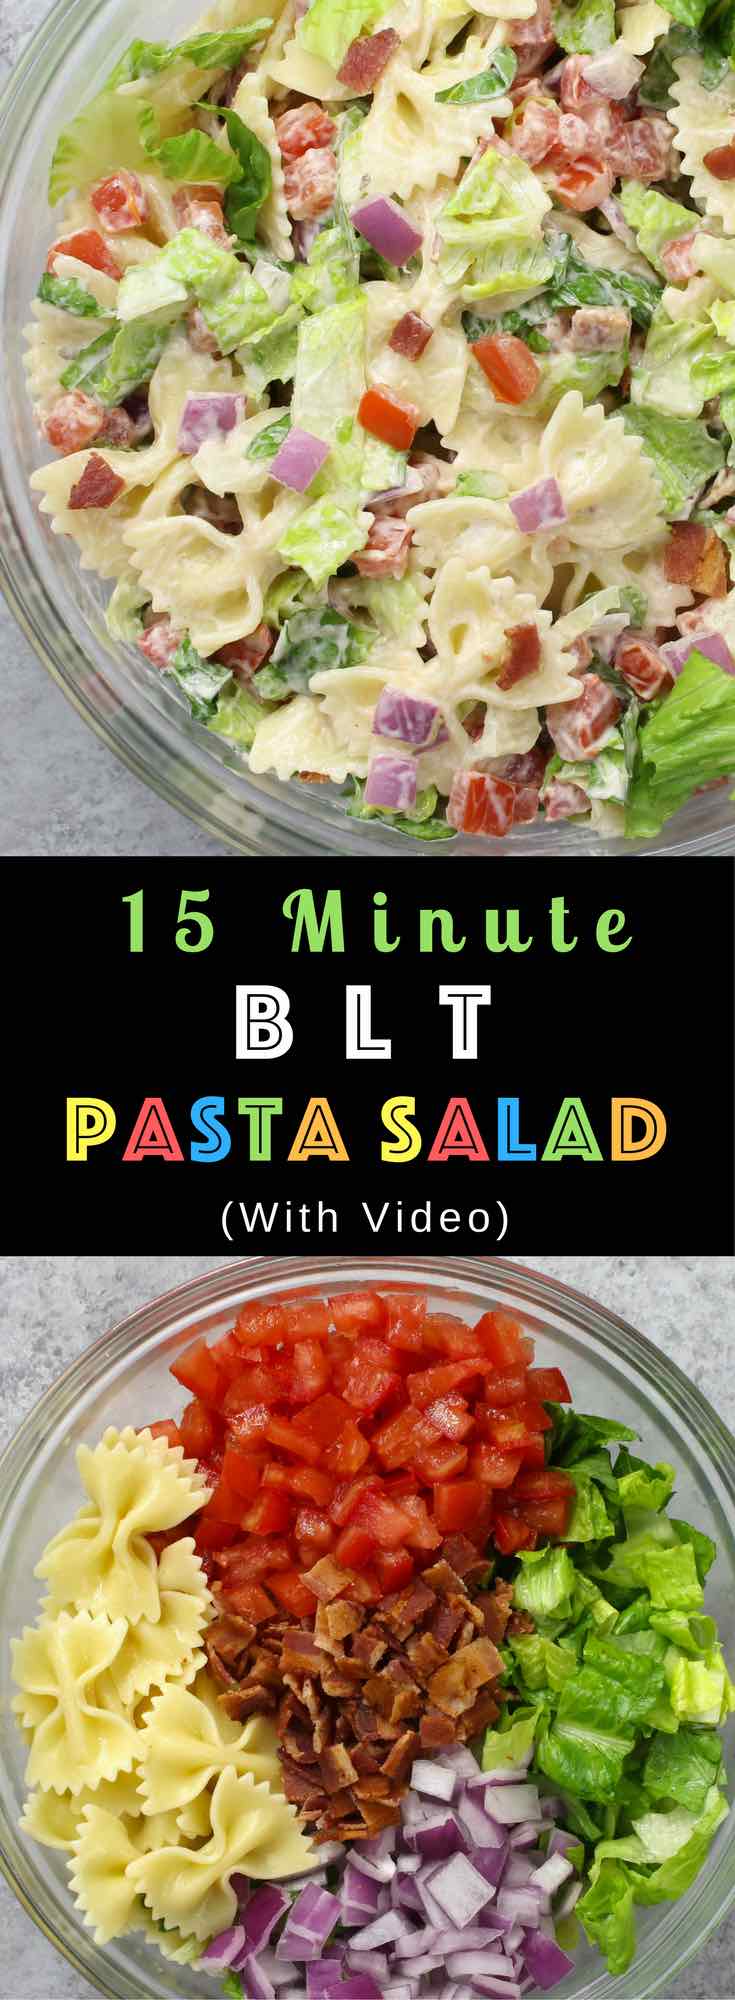 Easy BLT Pasta Salad – Ready in 15 minutes and a guaranteed hit with the pasta and vegetables coated in creamy dressing. All you need is some simple ingredients: Farfalle pasta, lettuce, tomatoes, red onion, mayonnaise, ranch dressing, yogurt and pepper. So yummy! Perfect for a summer time party or a picnic. Quick and easy recipe. Lunch or side dish. Video recipe. Tipbuzz.com